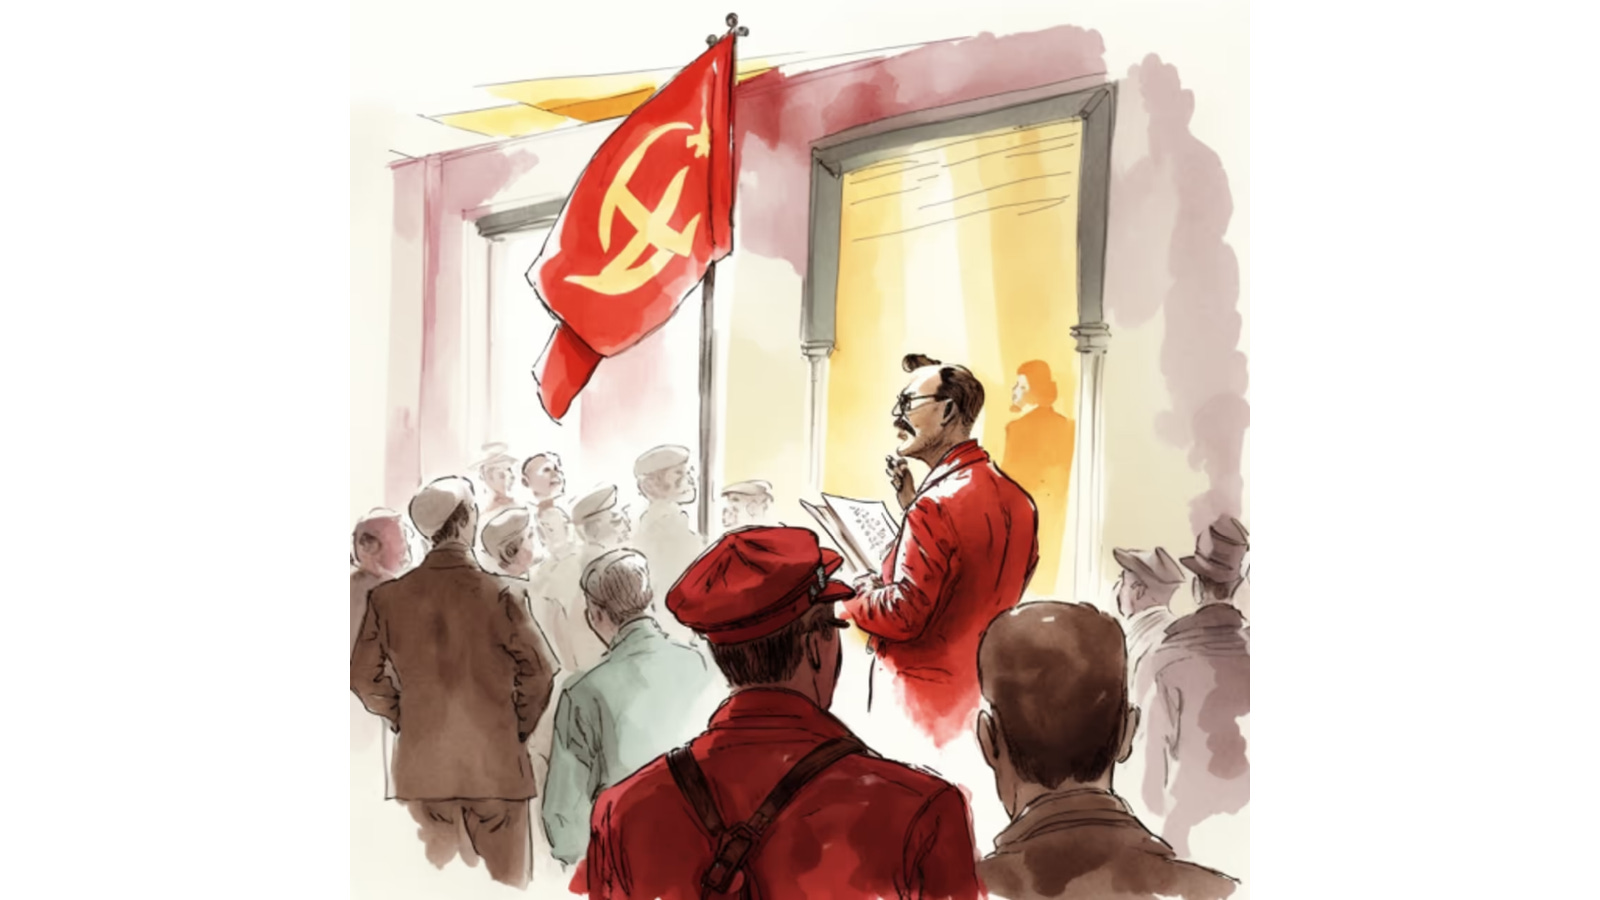 A man in a red coat stands in the middle of a crowded room with a communist flag upright in front of him.